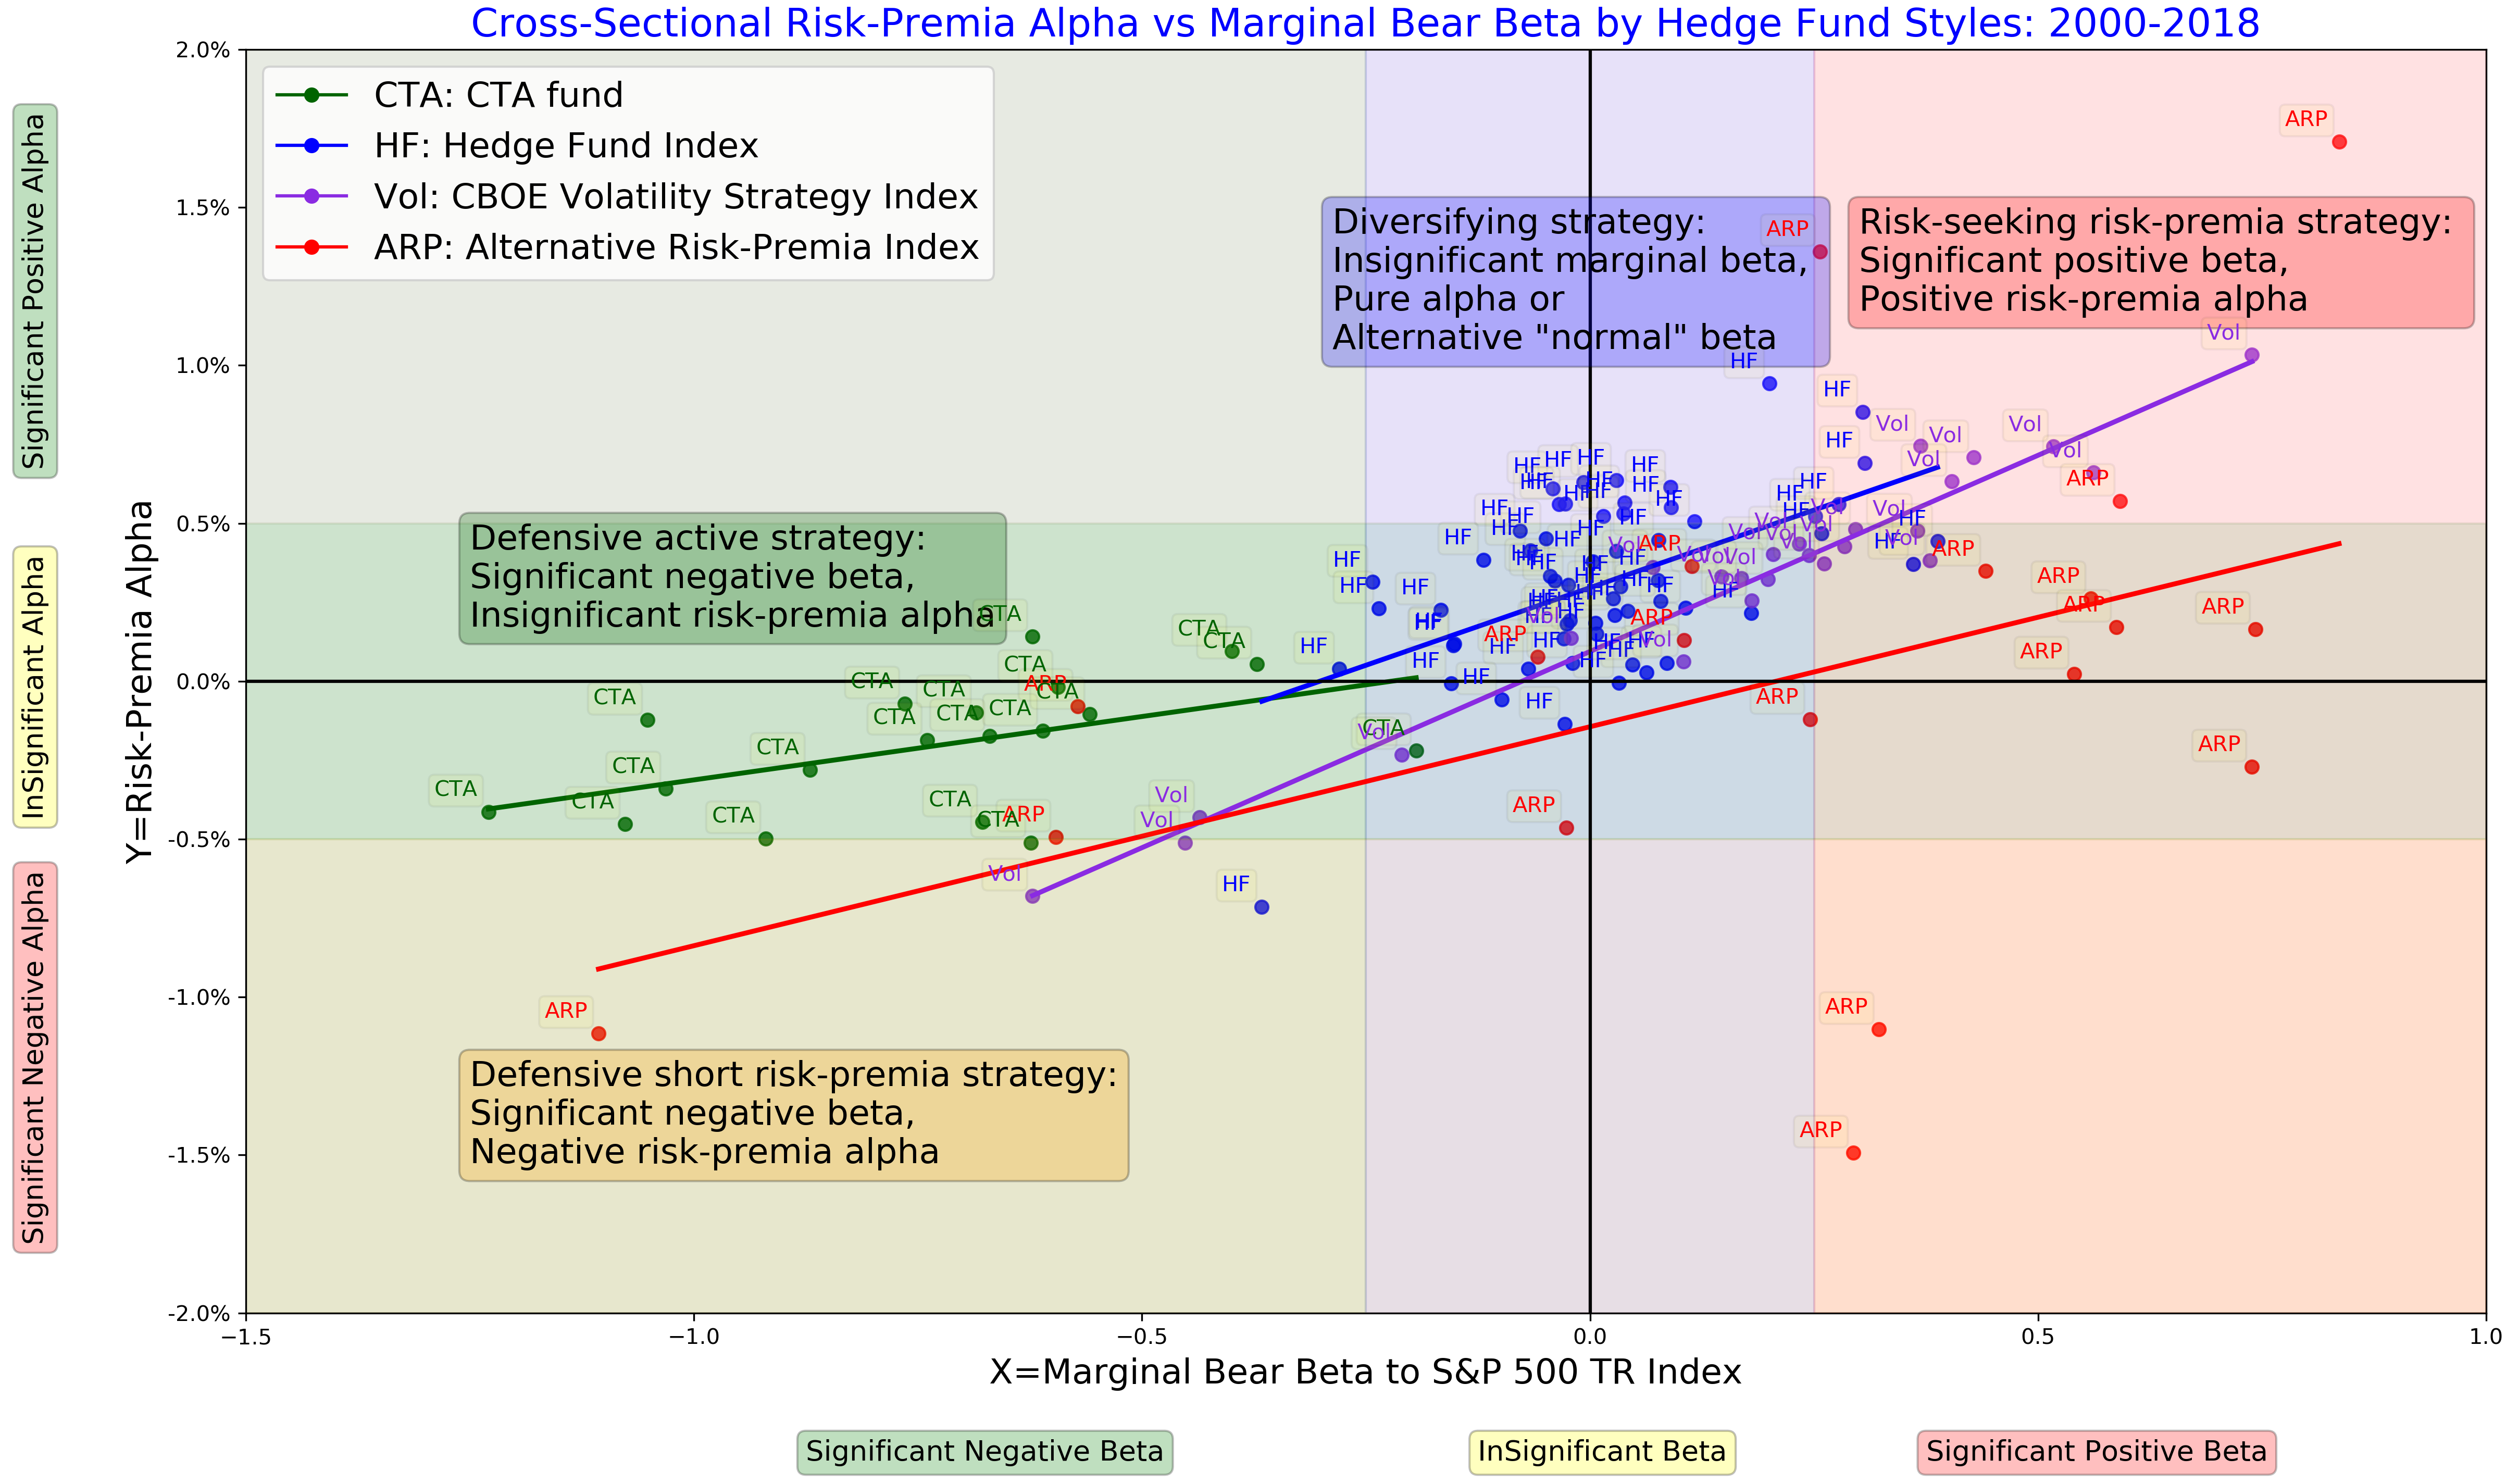 The cross-sectional risk-premia alpha versus marginal bear beta for hedge fund, ARP, and CTA indices